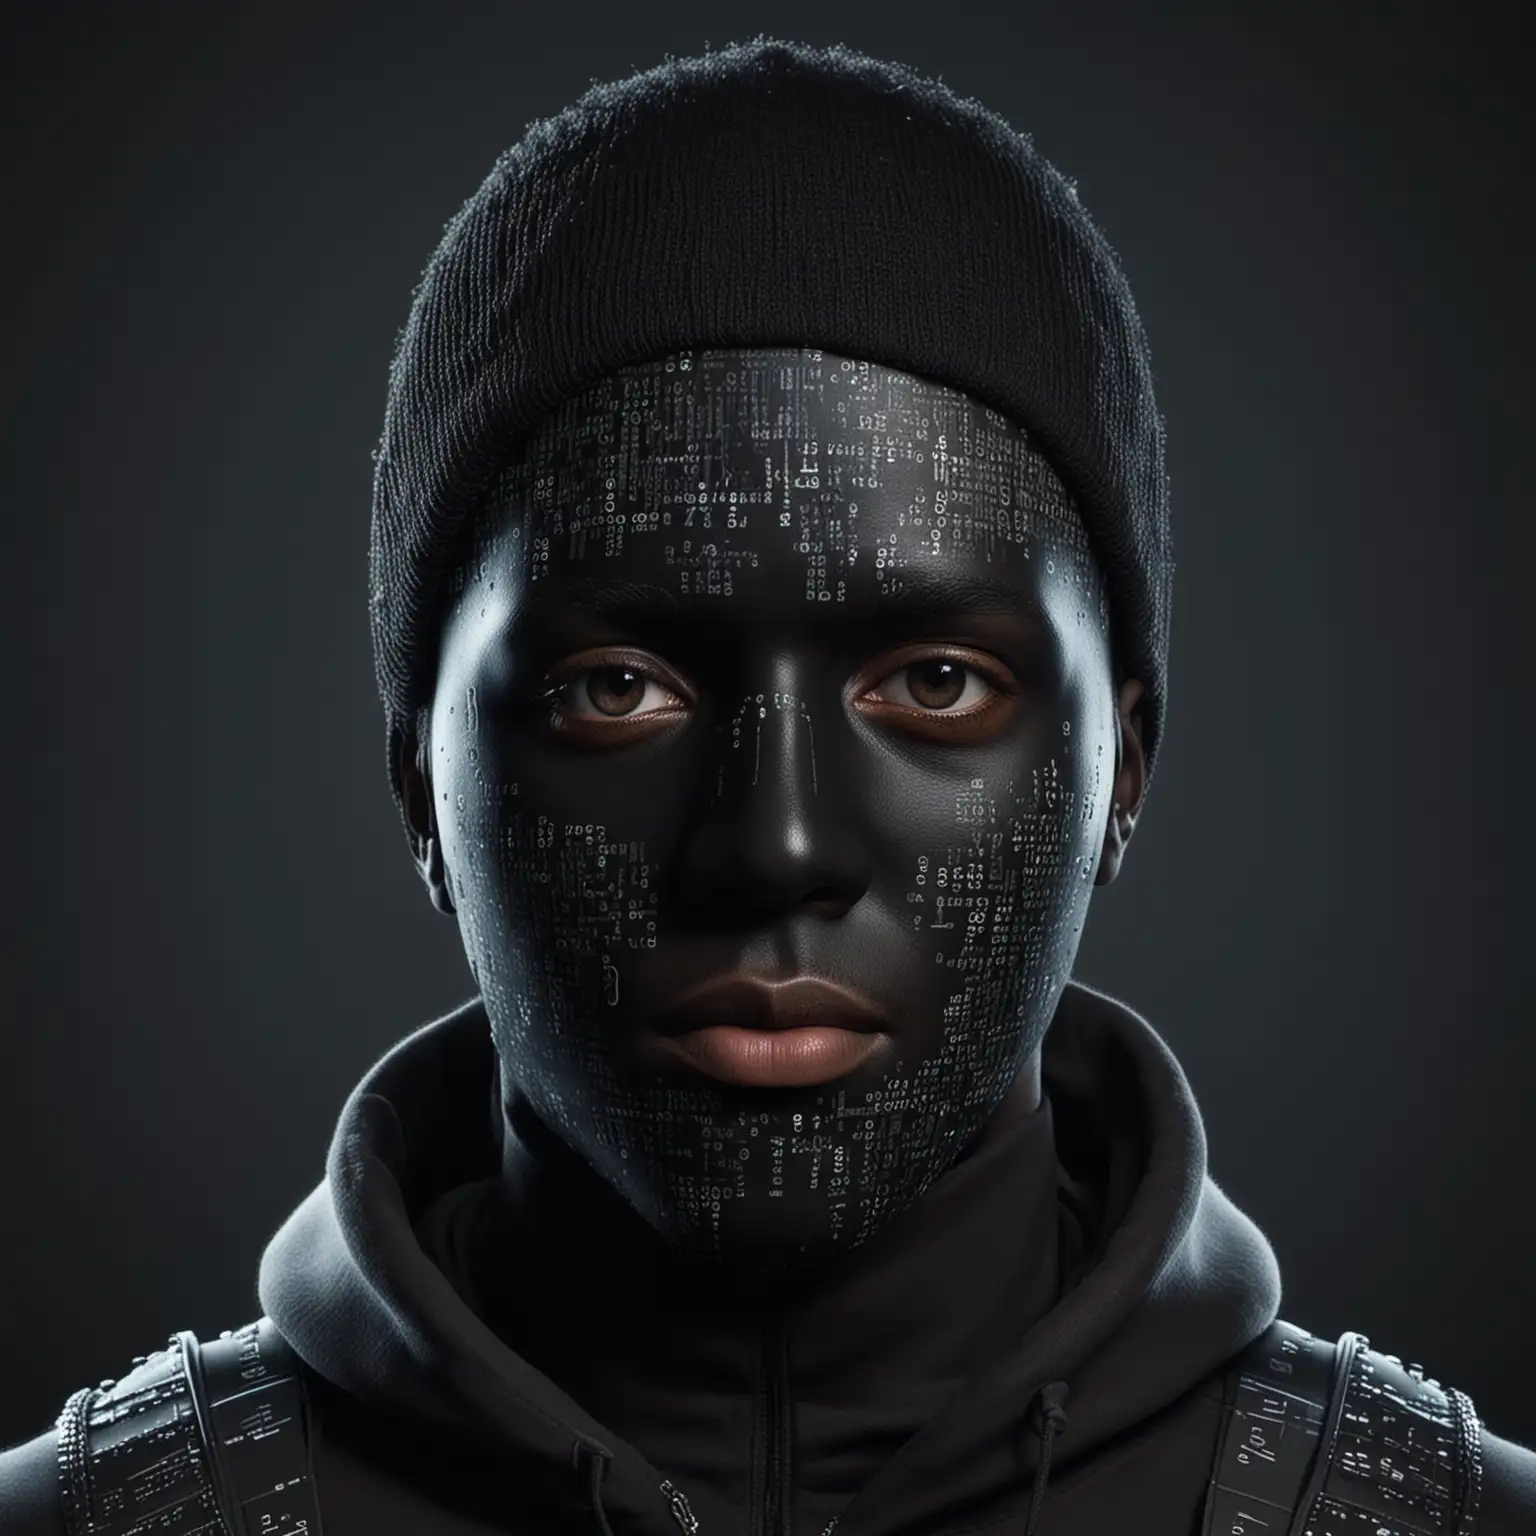 i need a 3d image of an ethnically black male hacker, with futuristic elements  cover entire face with a dark mask made up of digits 0 and 1. 